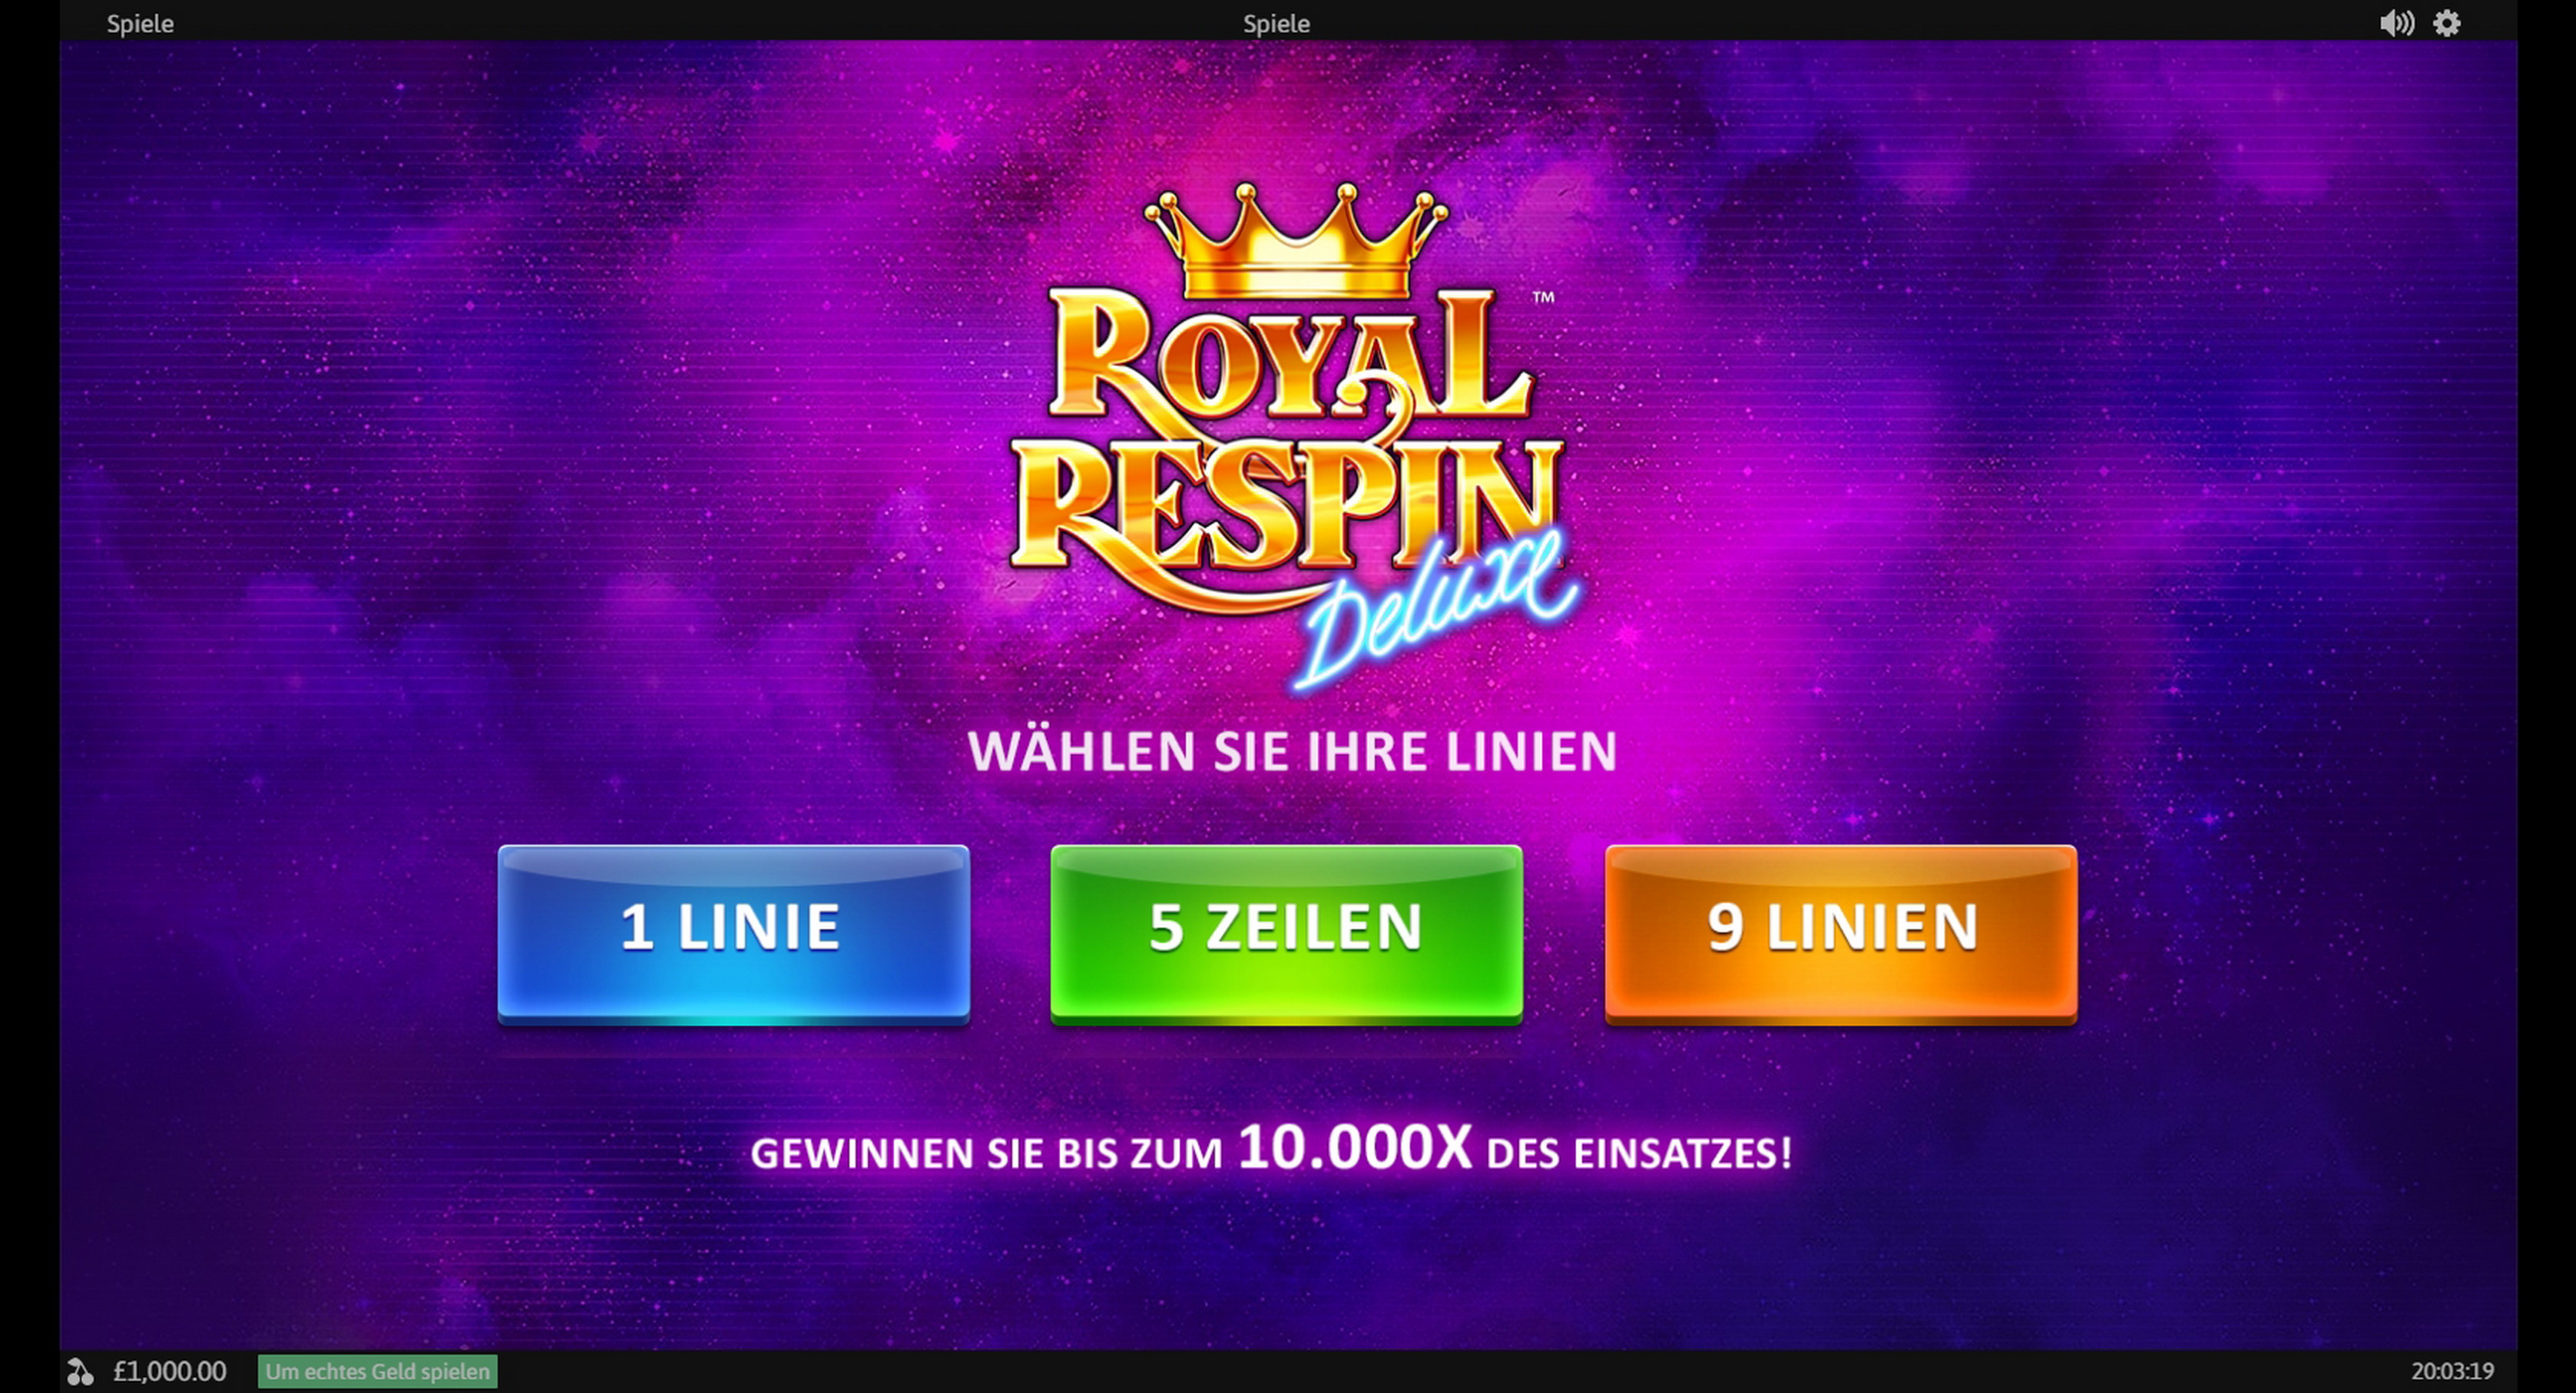 Play Royal Respin Deluxe Free Casino Slot Game by Playtech